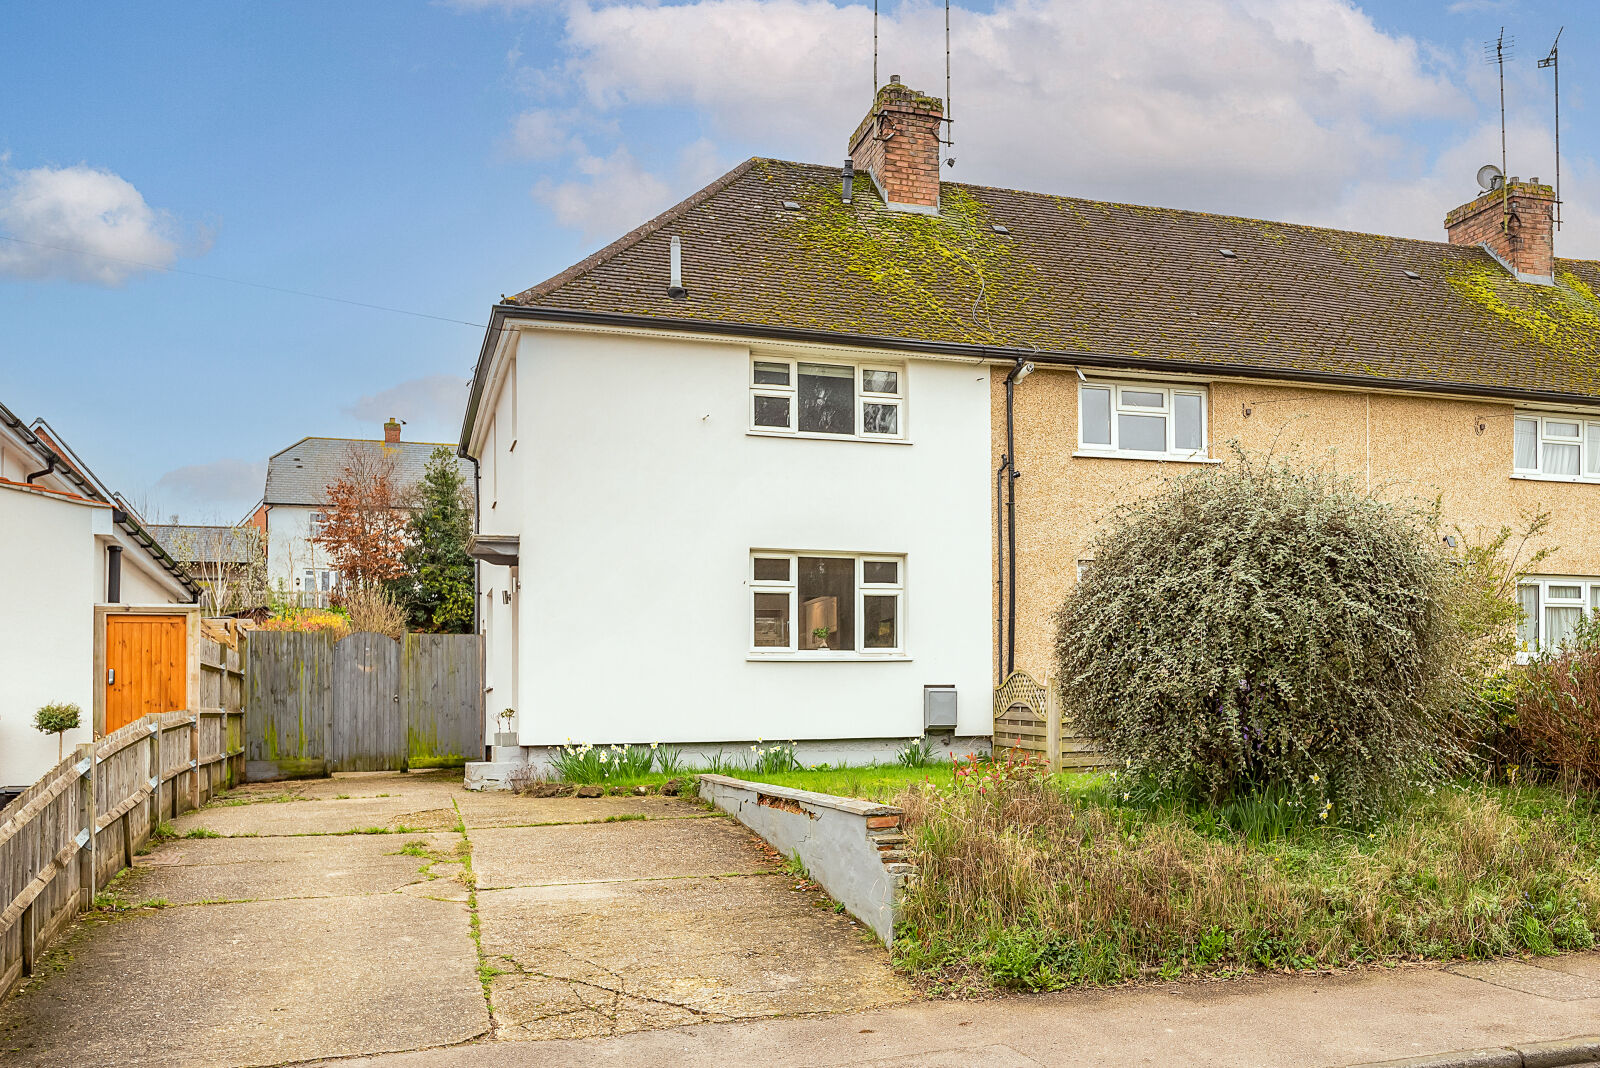 3 bedroom semi detached house for sale High Street, Hitchin, SG4, main image